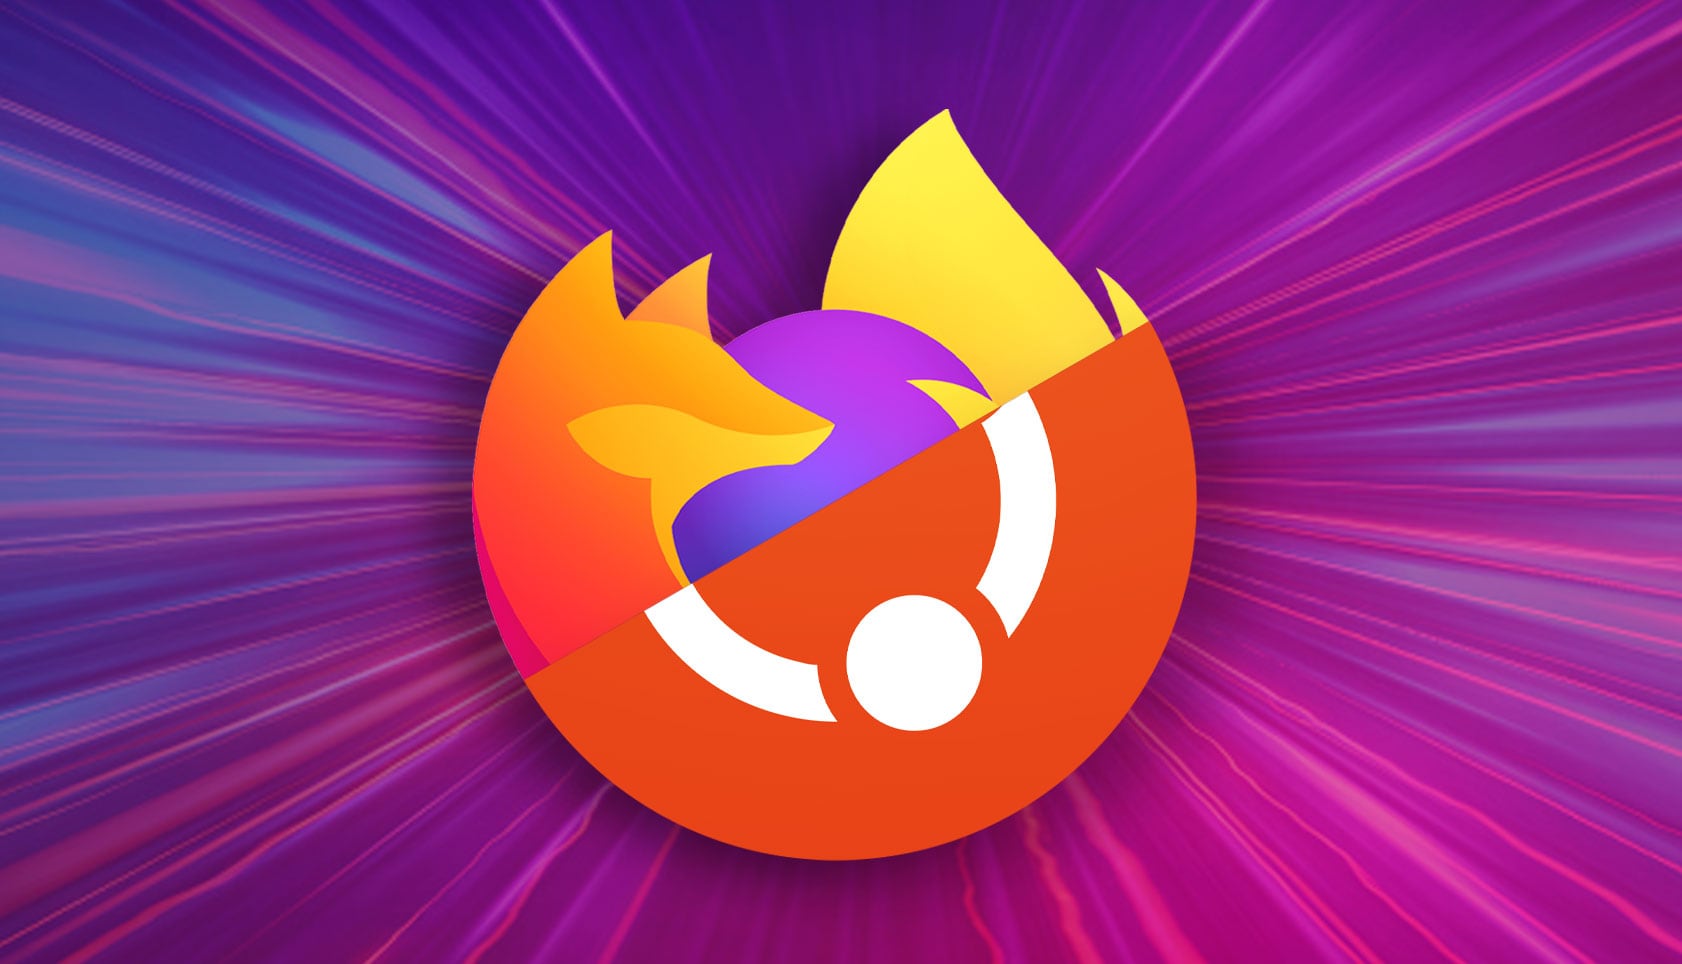 half of a firefox logo and half of an ubuntu logo against a speed background